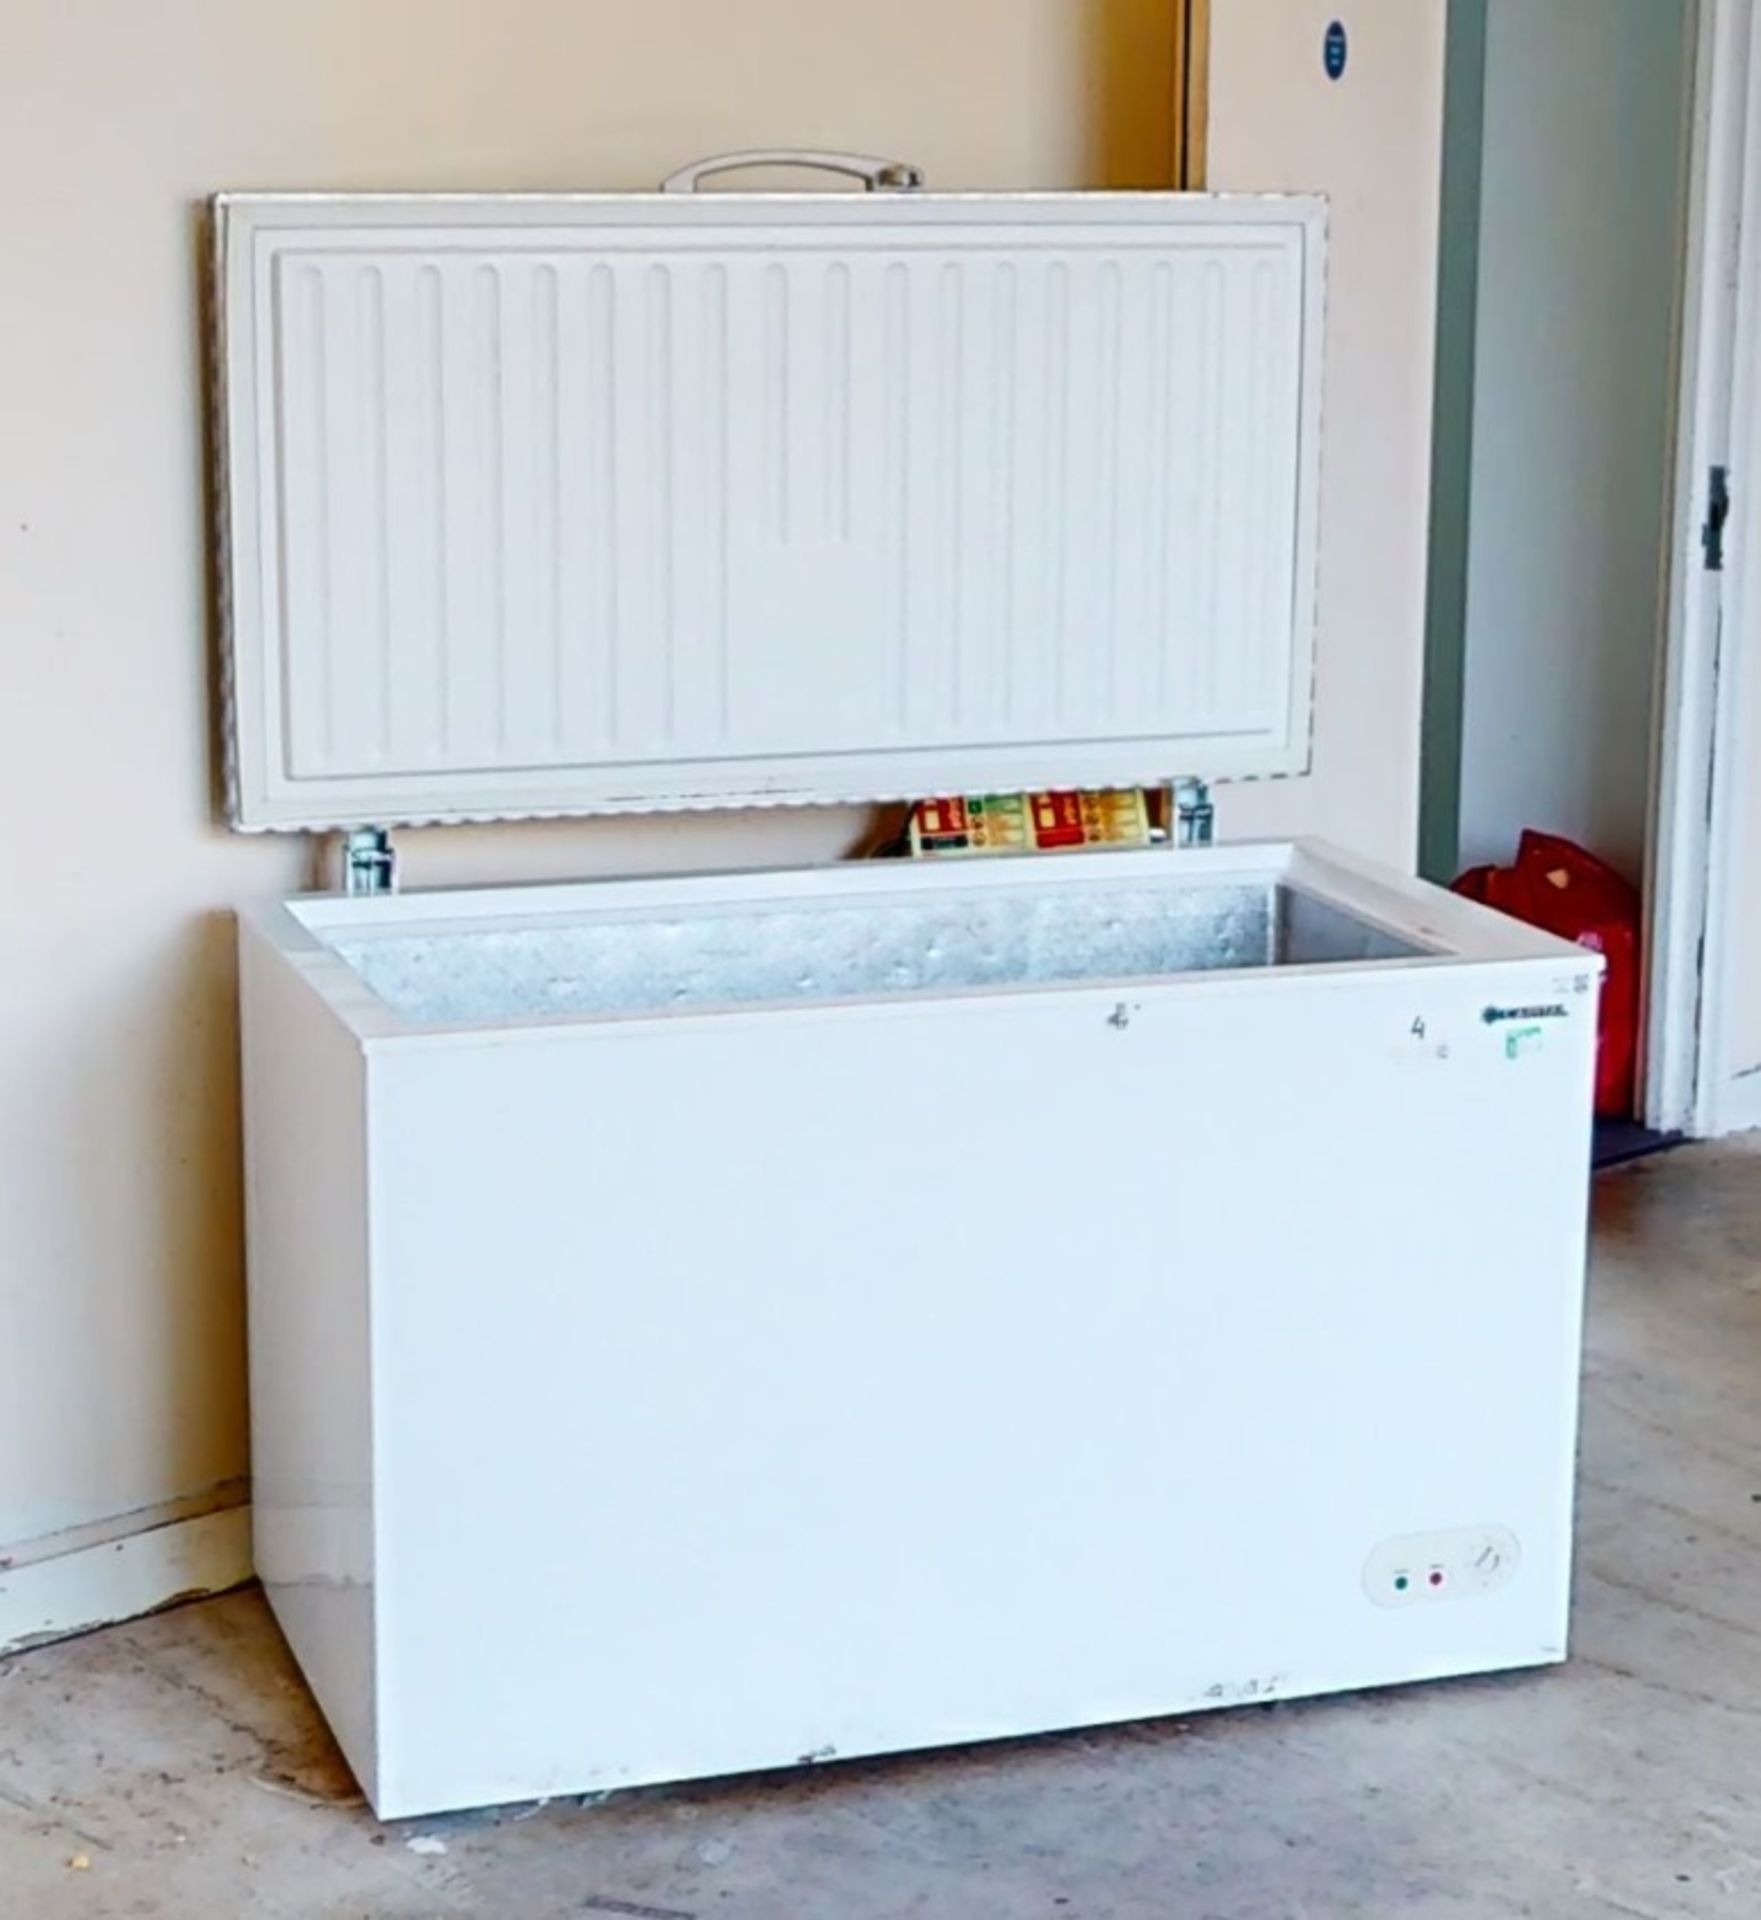 1 x Eco-Freeze Commercial Chest Freezer With Stainless Steel Top - Image 8 of 8